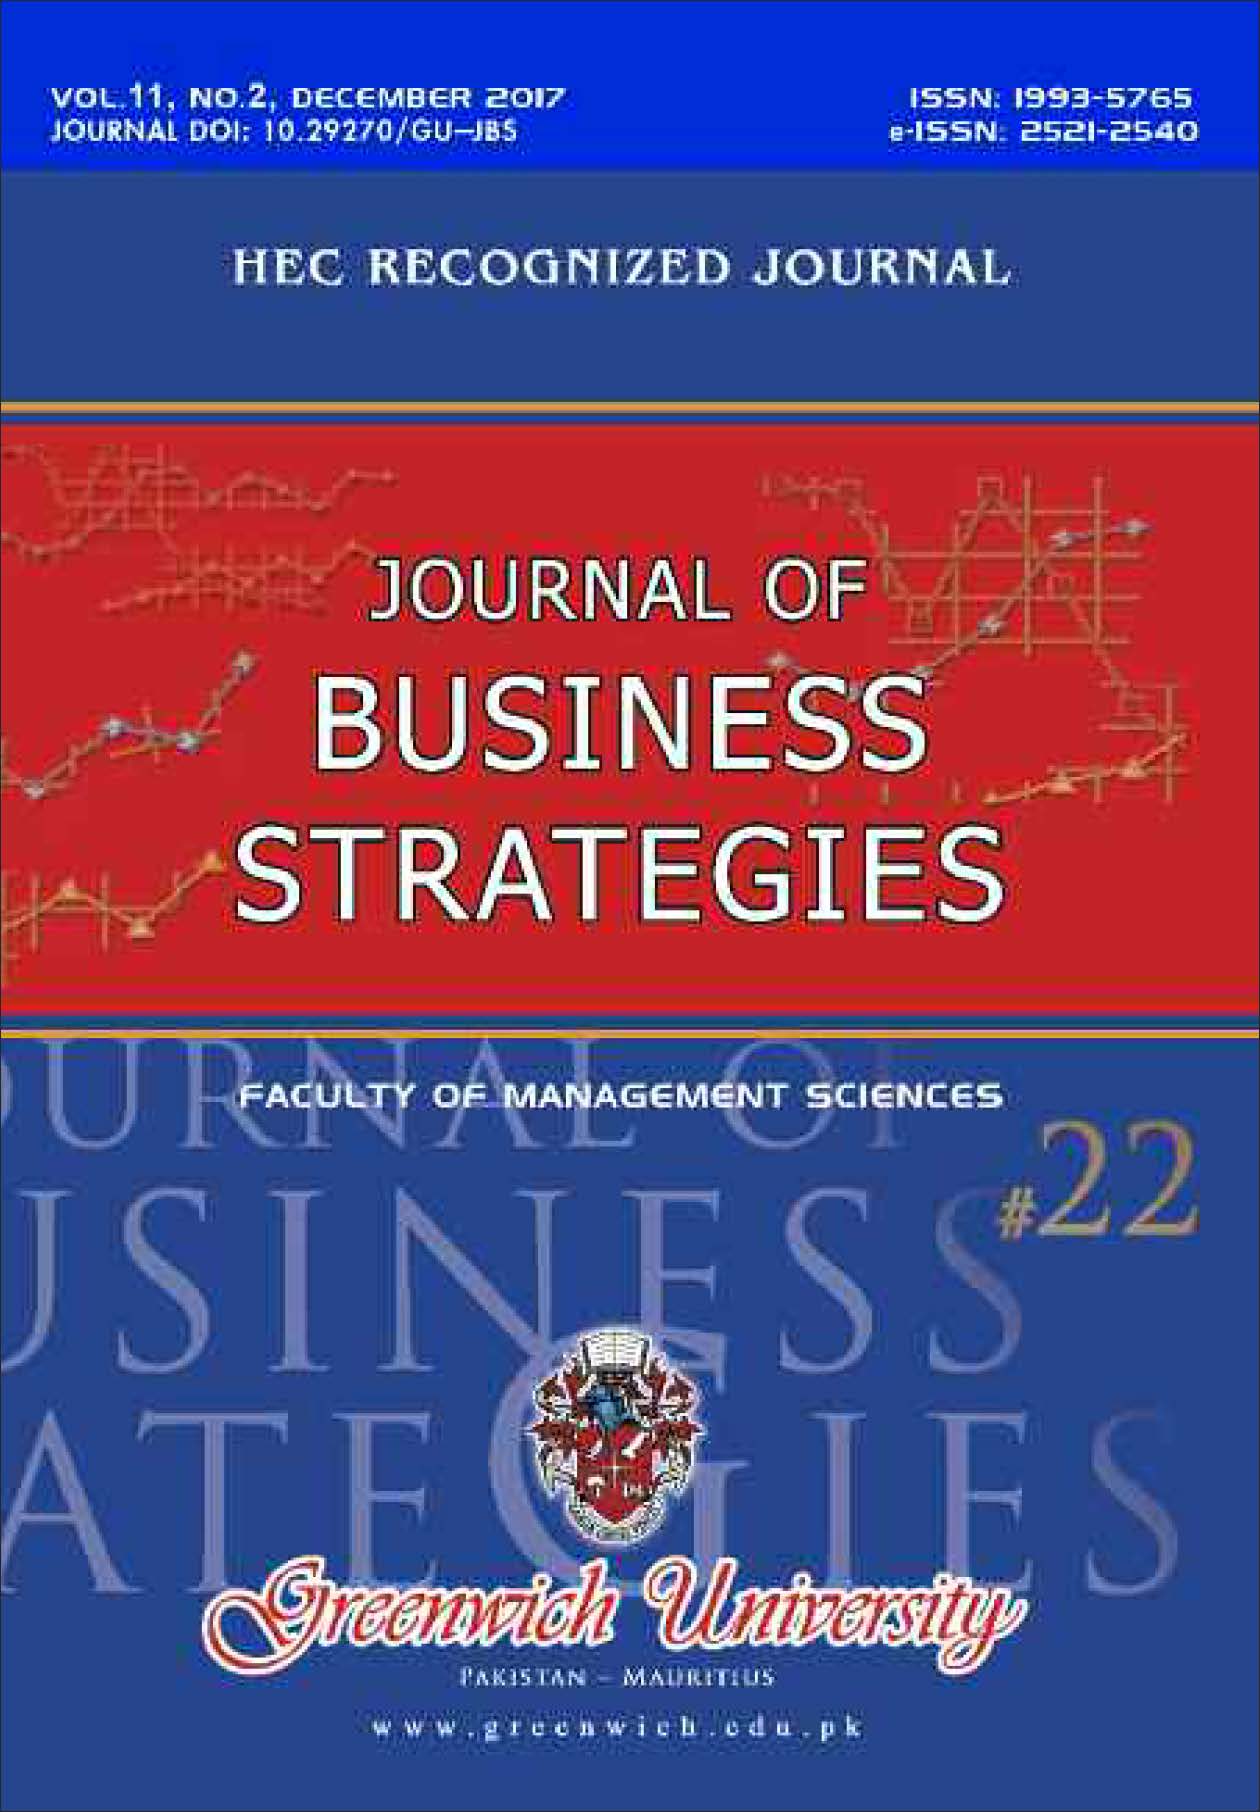 					View Vol. 11 No. 2 (2017): Journal of Business Strategies (December'17) Issue No. 22
				